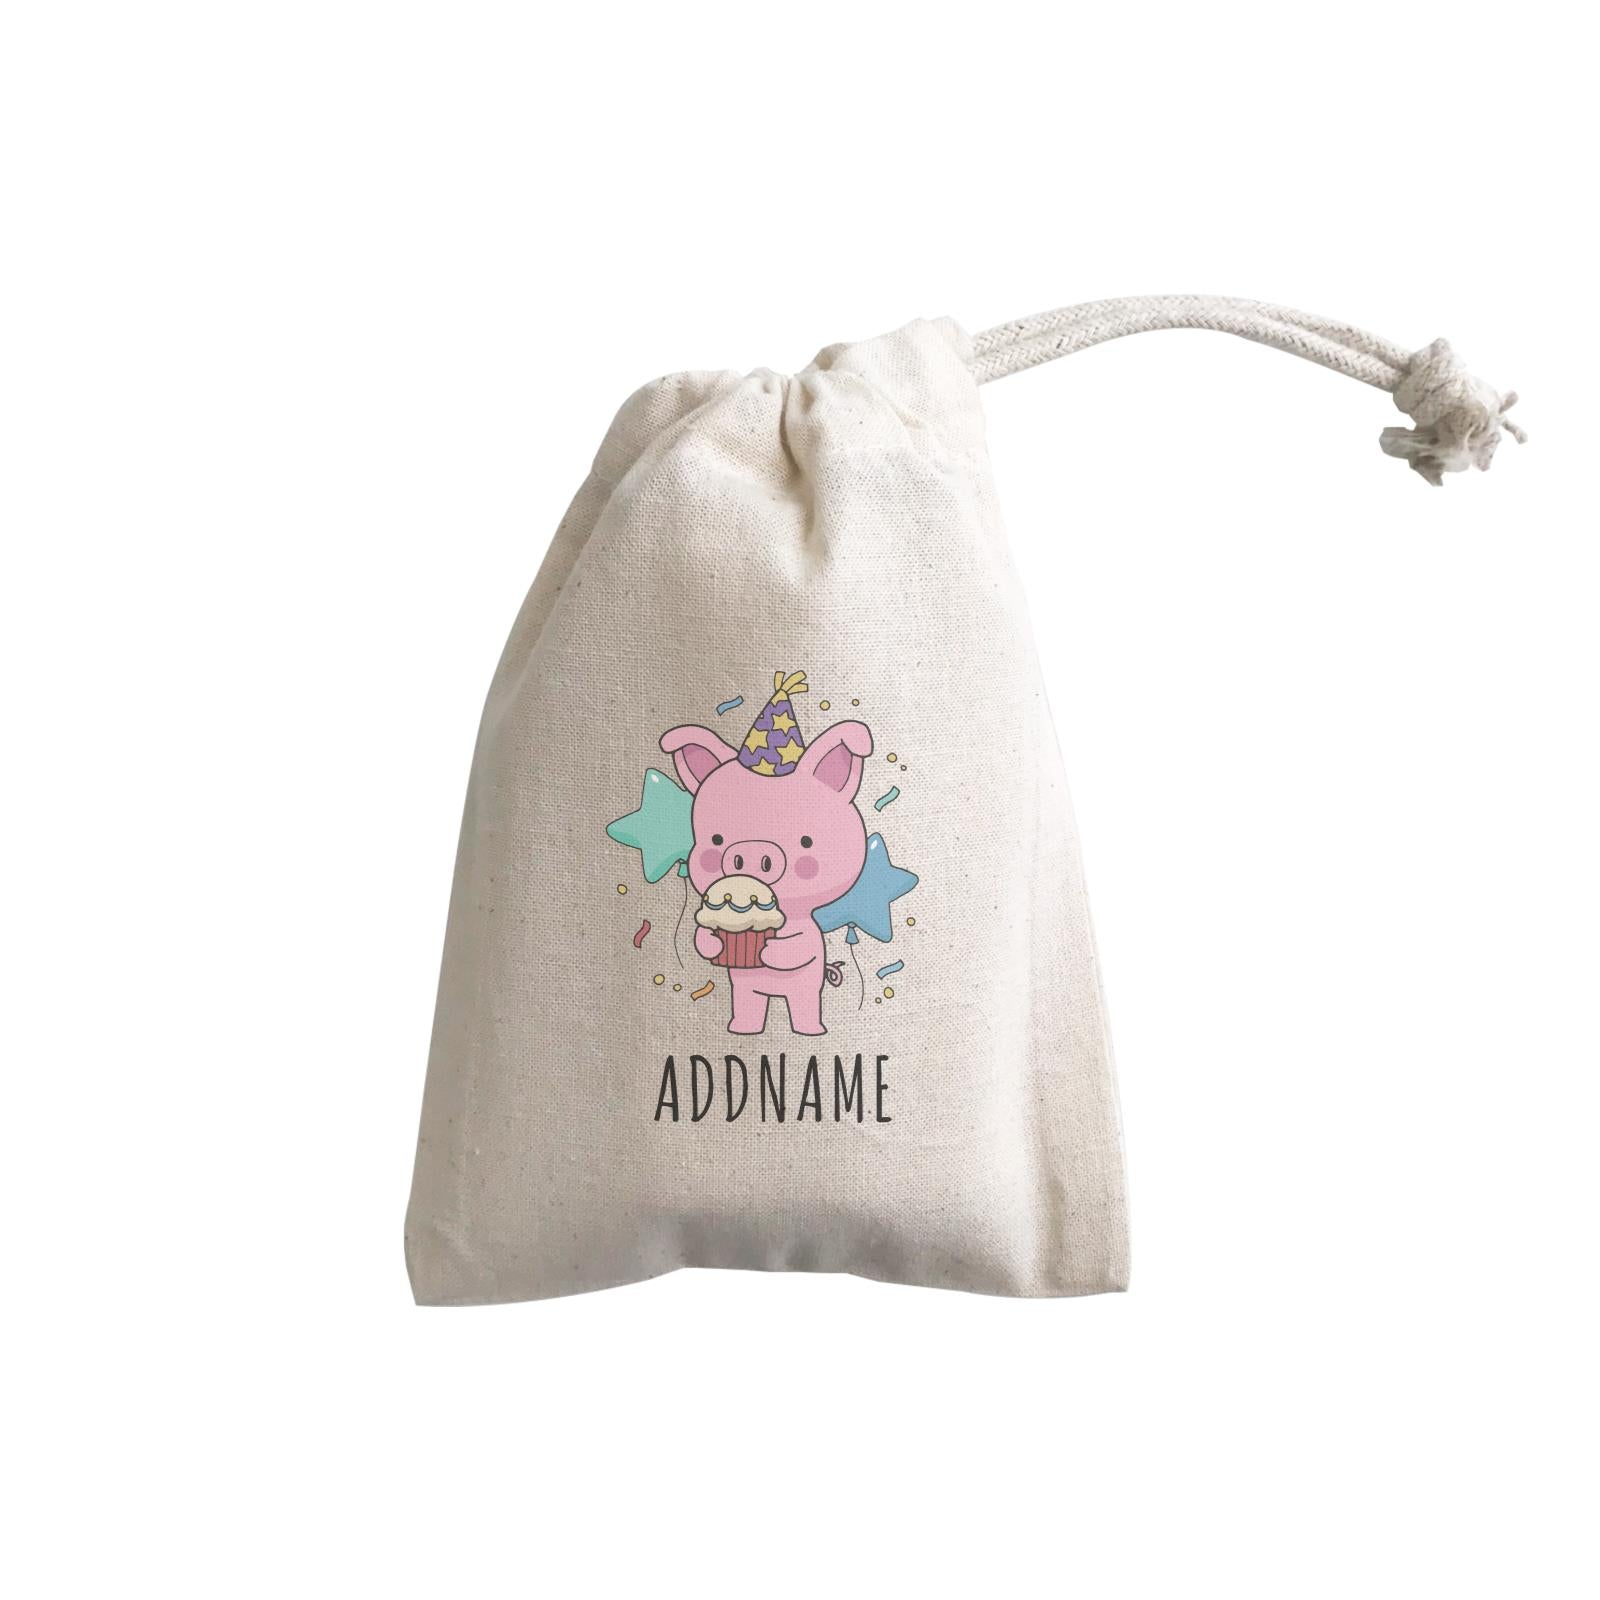 Birthday Sketch Animals Pig with Party Hat Eating Cupcake Addname GP Gift Pouch